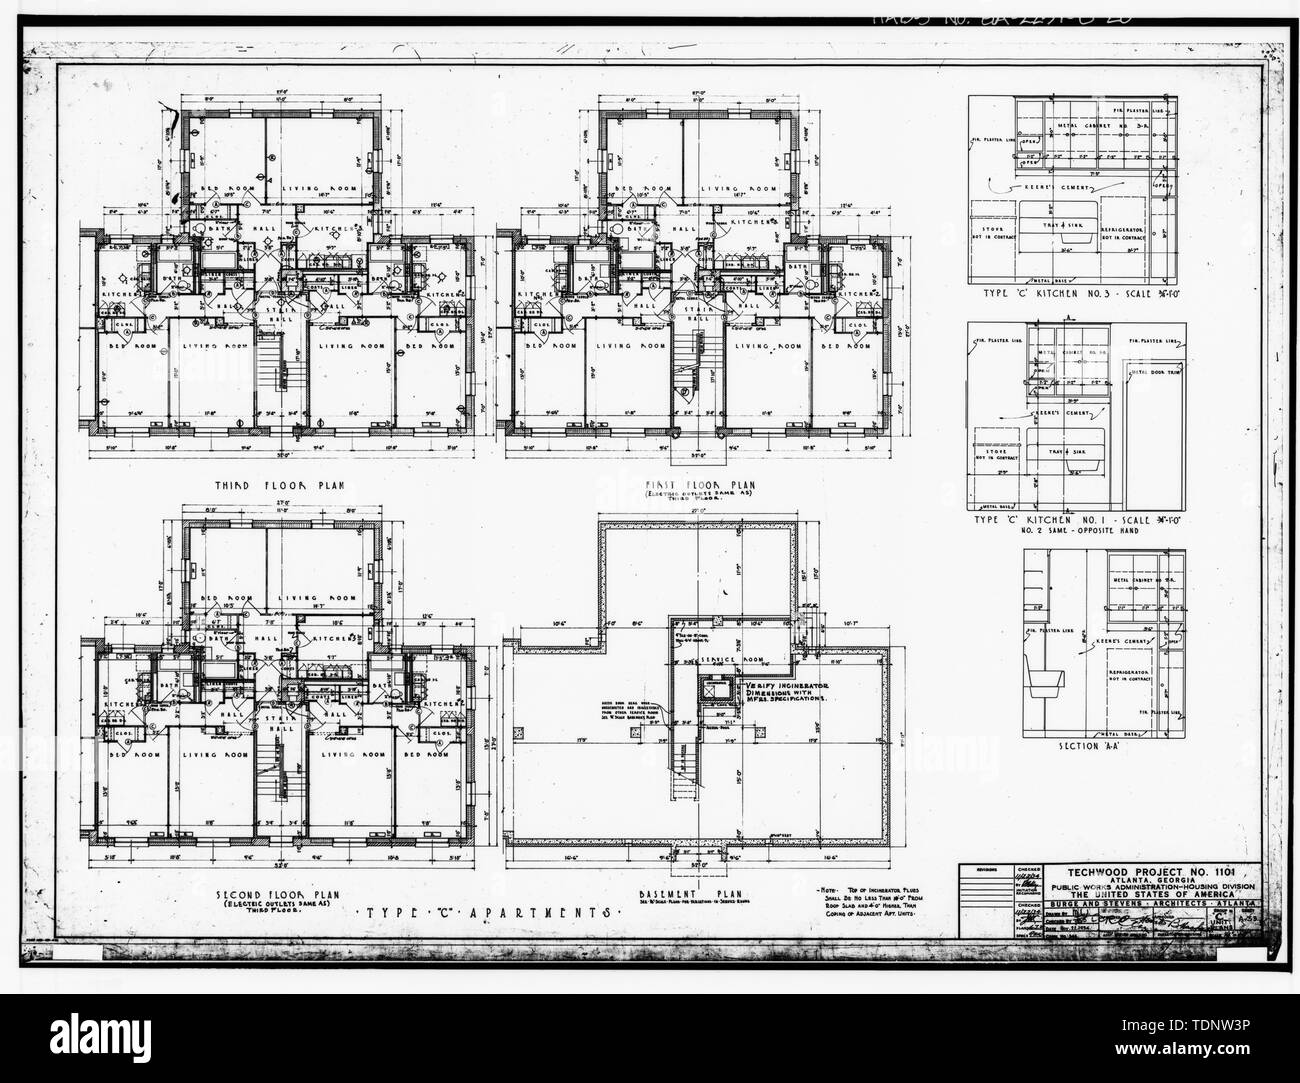 Photocopy of Drawing (November 1934 Architectural Drawings by Burge and Stevens, in Possession of the Engineering and Capital Improvements Department of the Atlanta Housing Authority, Atlanta, Georgia). FLOOR PLANS, TYPE 'C' APARTMENTS, KITCHEN ELEVATIONS, TECHWOOD PROJECT -1101, SHEET A-53. - Techwood Homes, Building No. 1, 575-579 Techwood Drive, Atlanta, Fulton County, GA Stock Photo